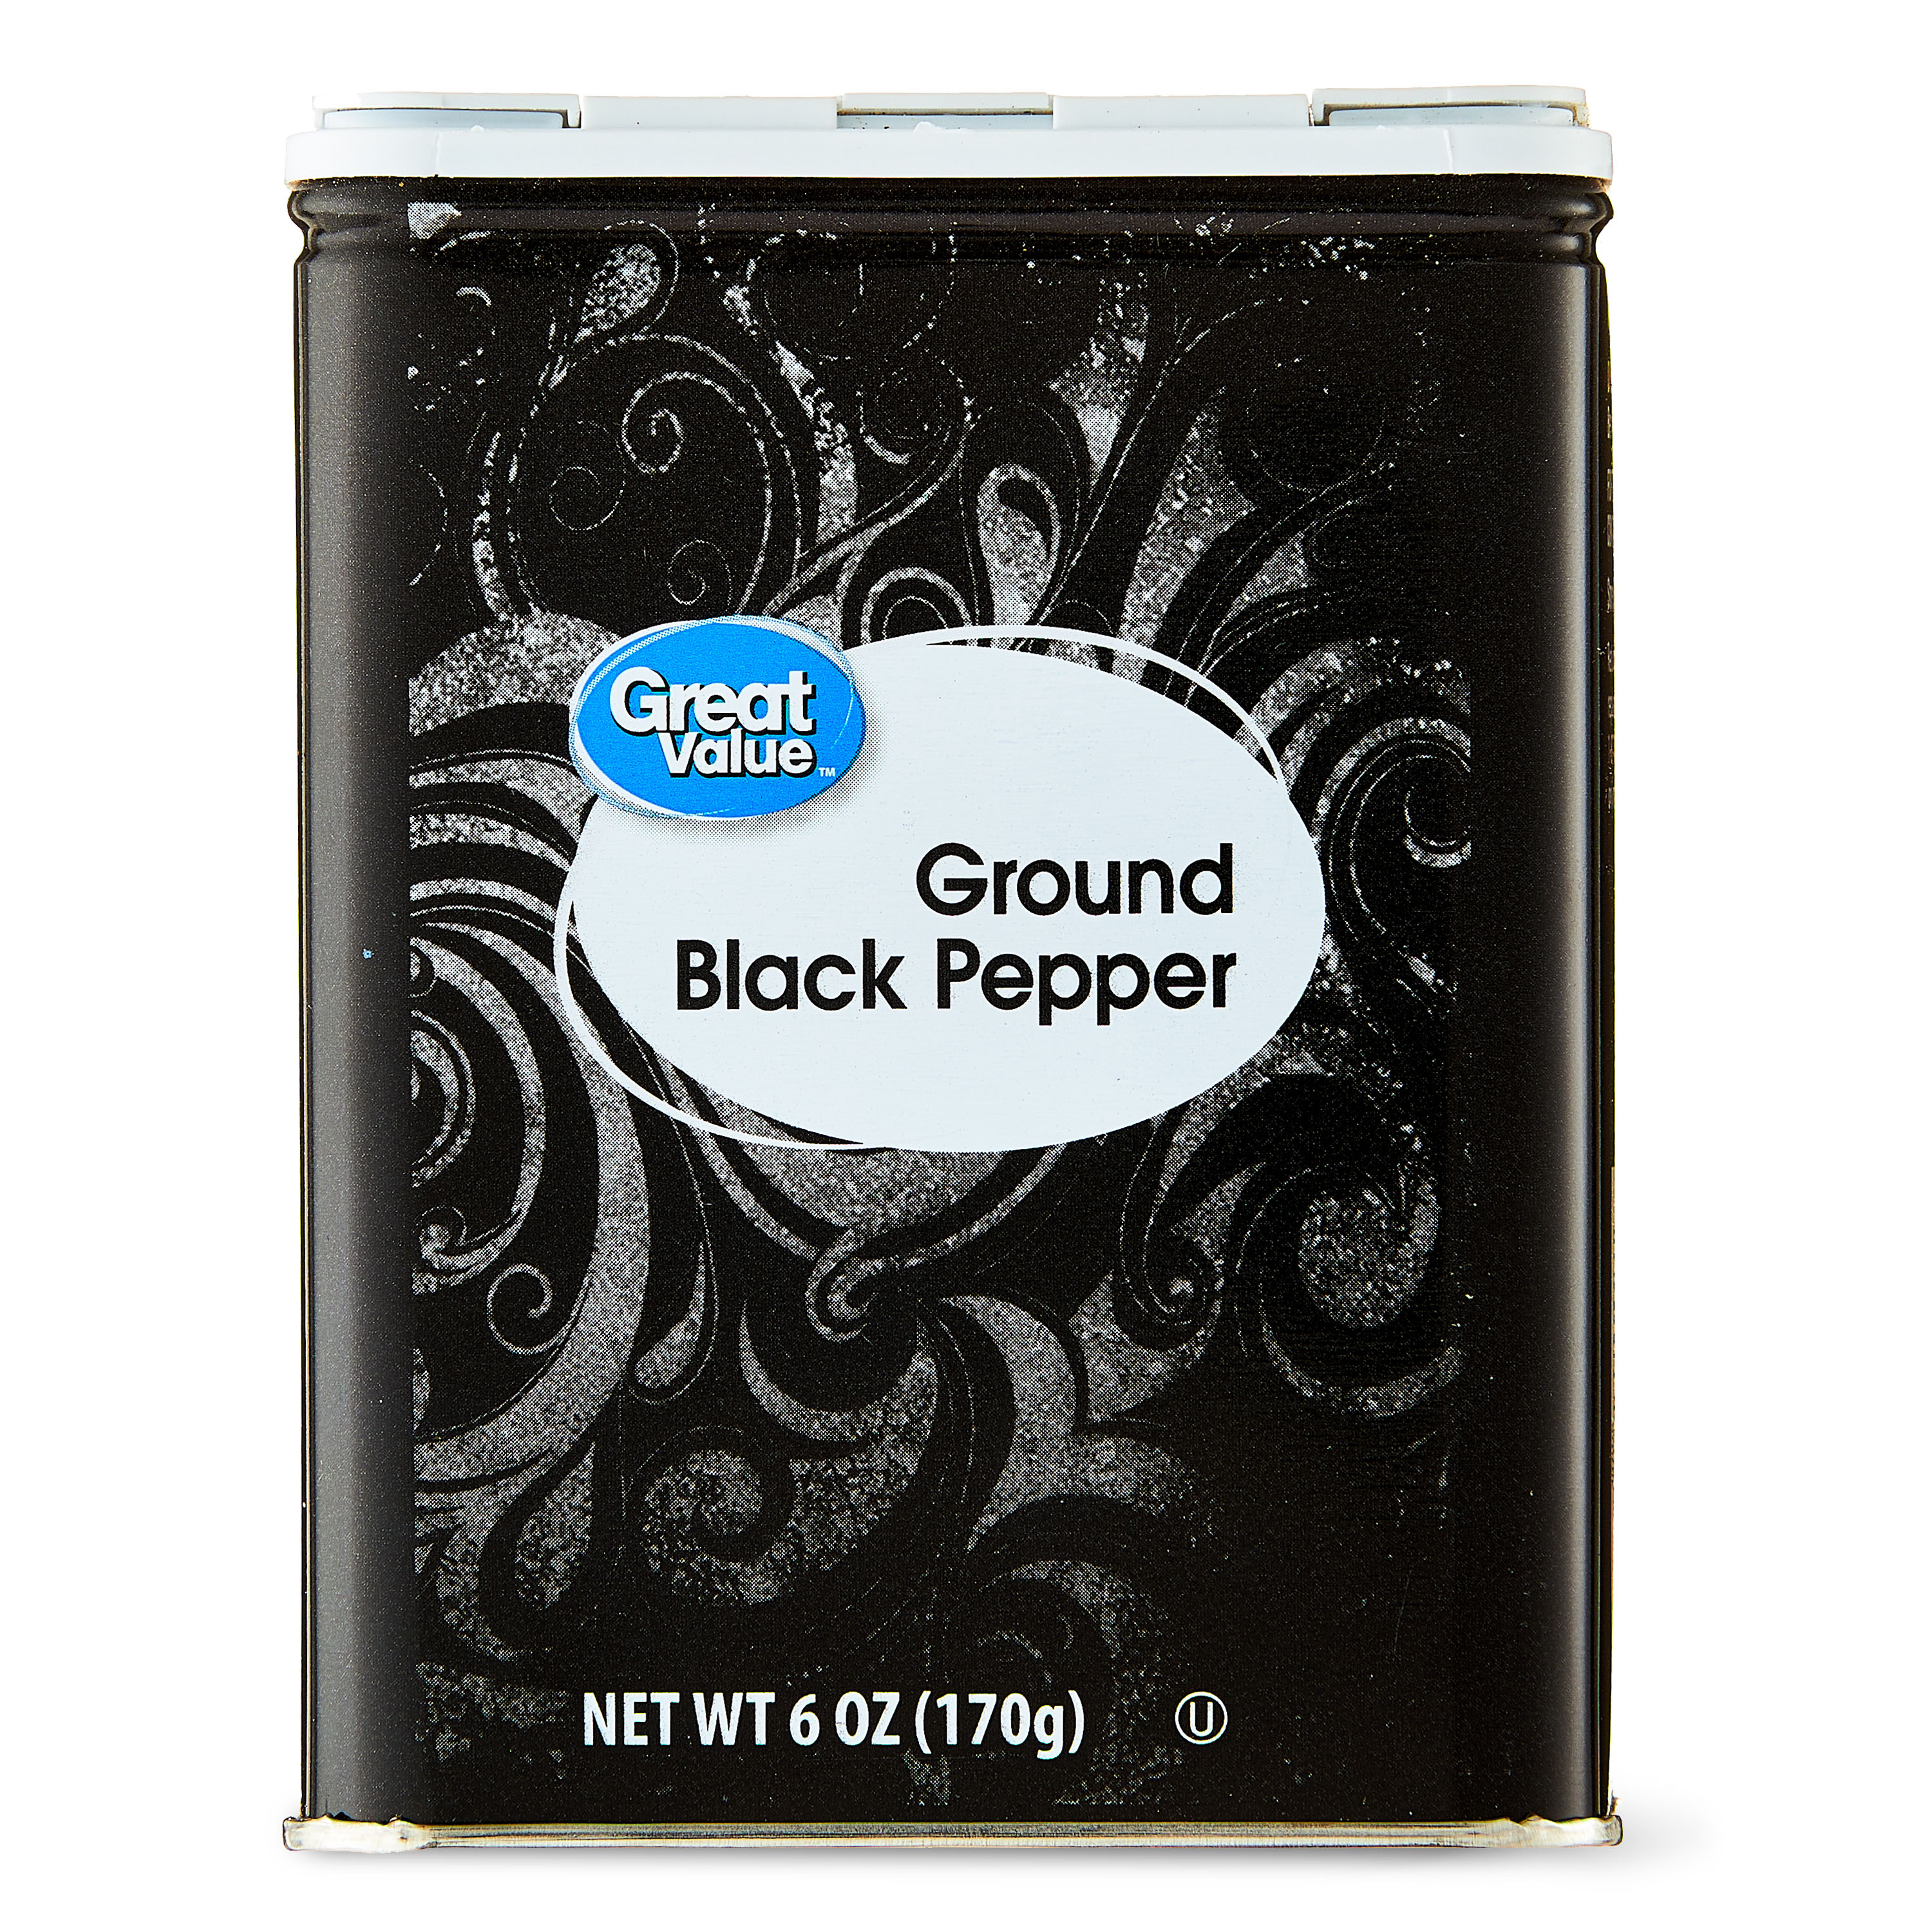 Great Value Ground Black Pepper, 6 oz - image 1 of 9